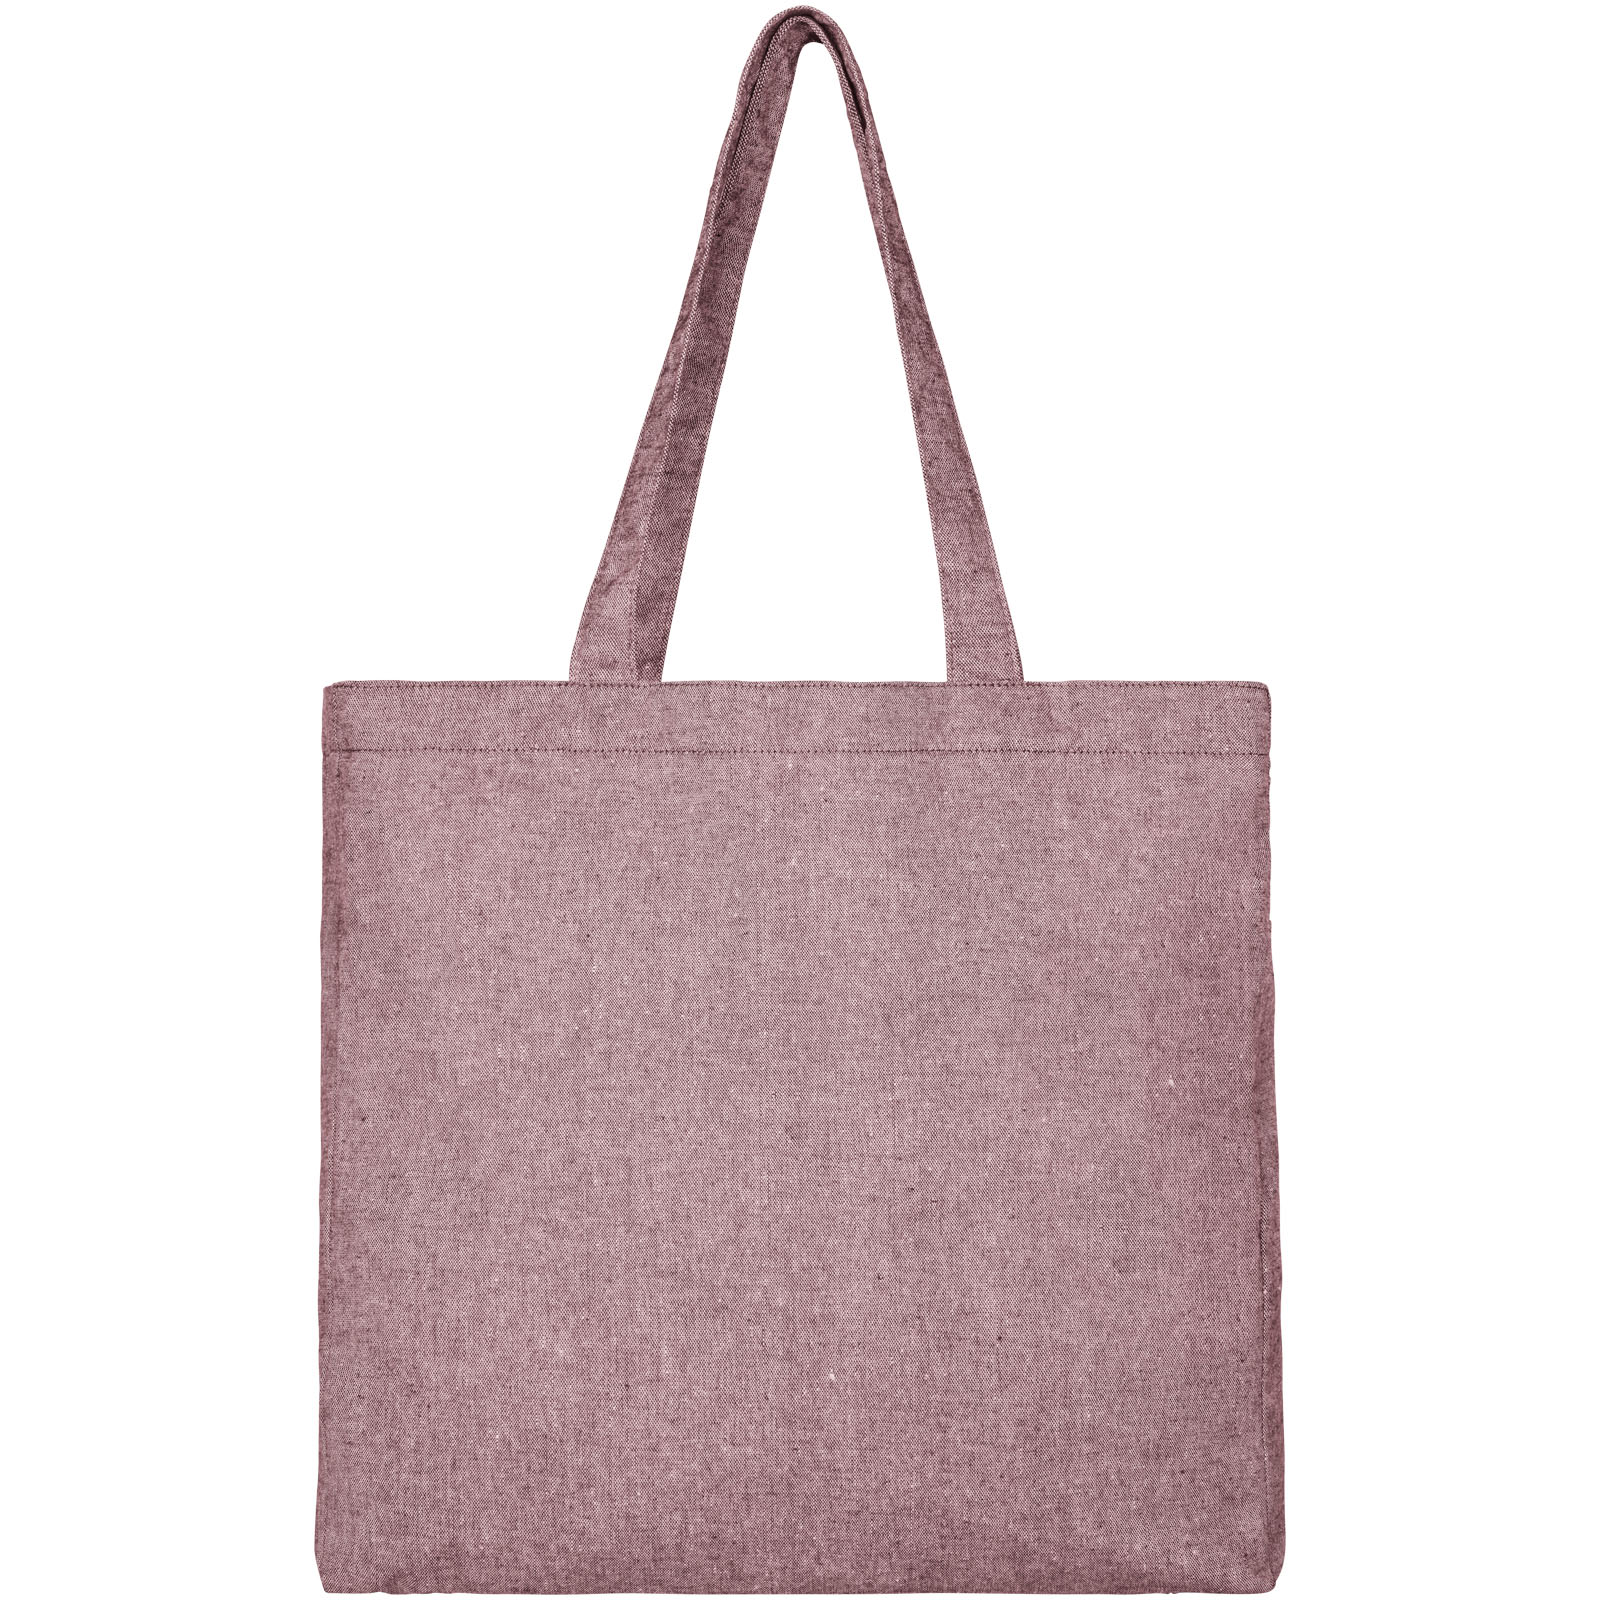 Advertising Shopping & Tote Bags - Pheebs 210 g/m² recycled gusset tote bag 13L - 1